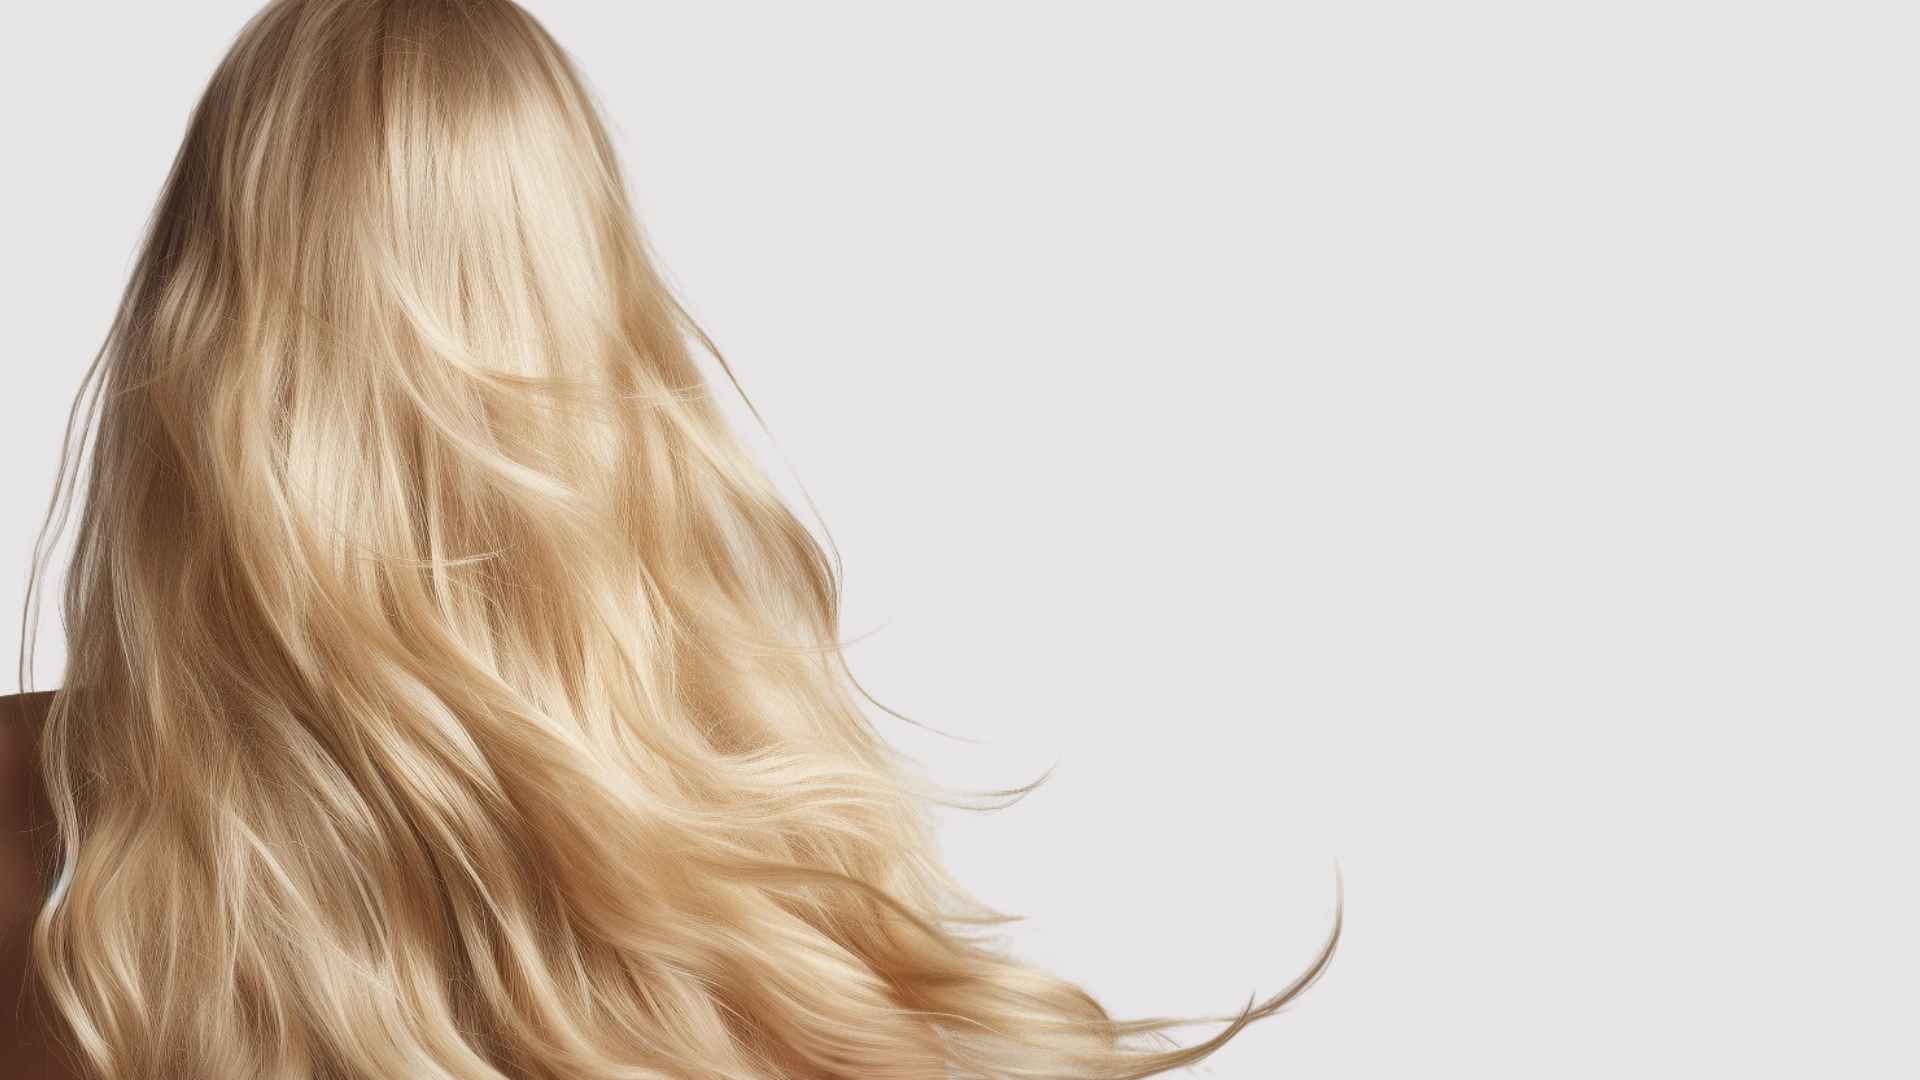 Deep Hair Conditioner -model with long blonde hair - back of head